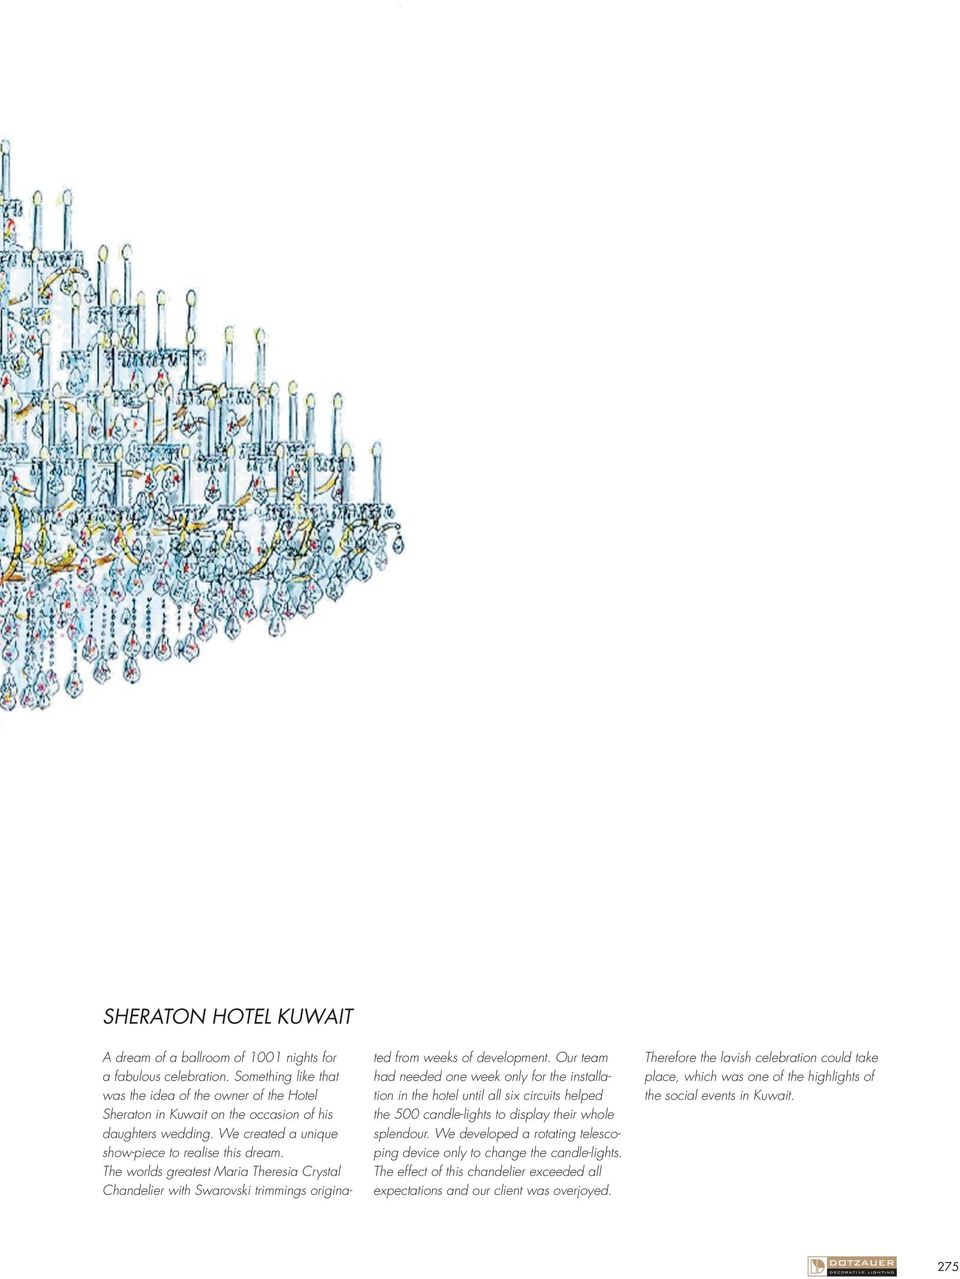 The worlds greatest Maria Theresia Crystal Chandelier with Swarovski trimmings originated from weeks of development.